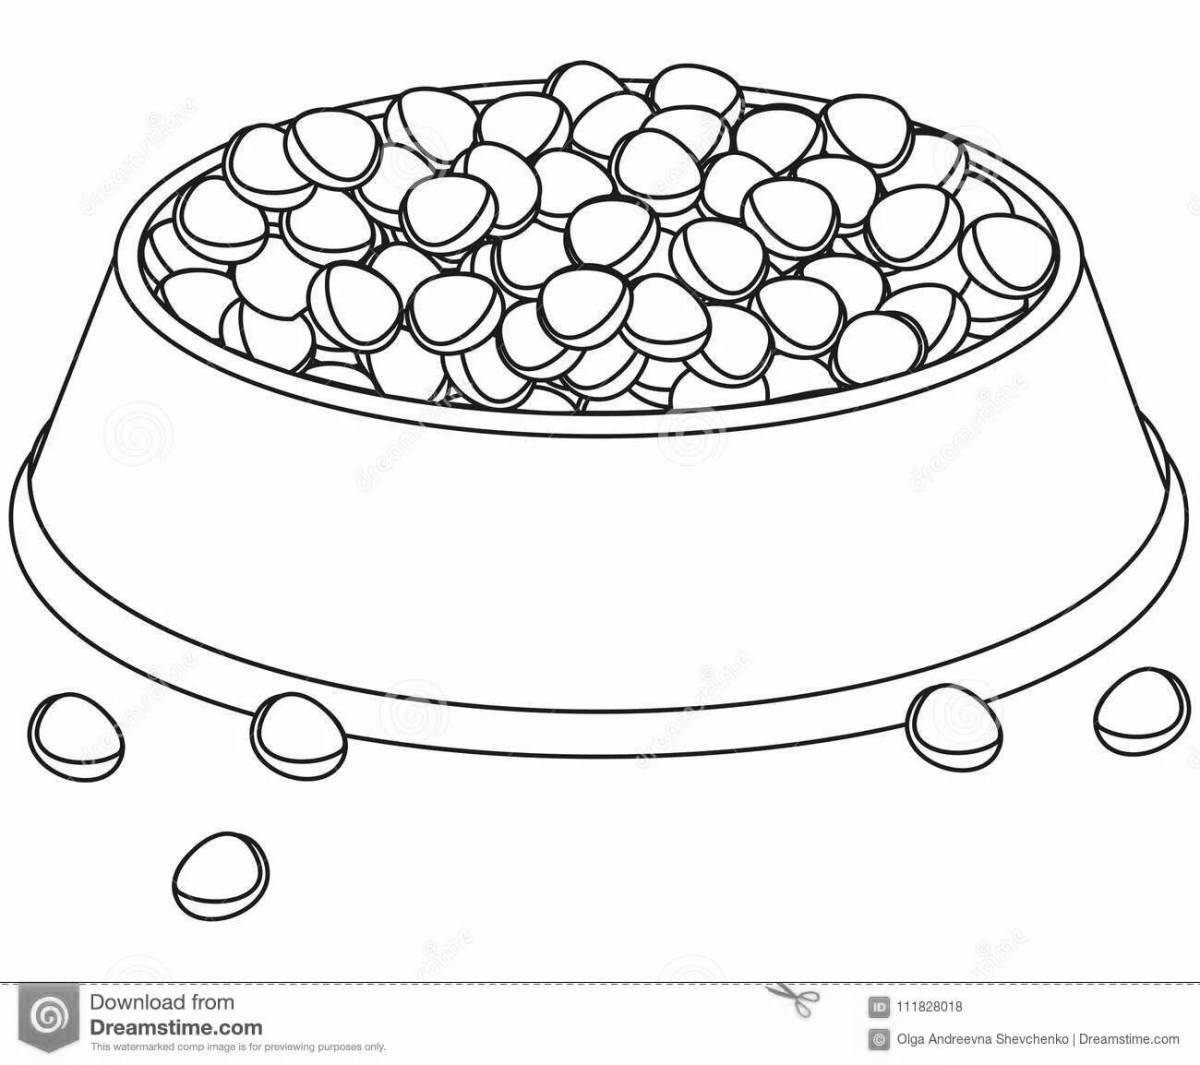 Exciting cat food coloring page